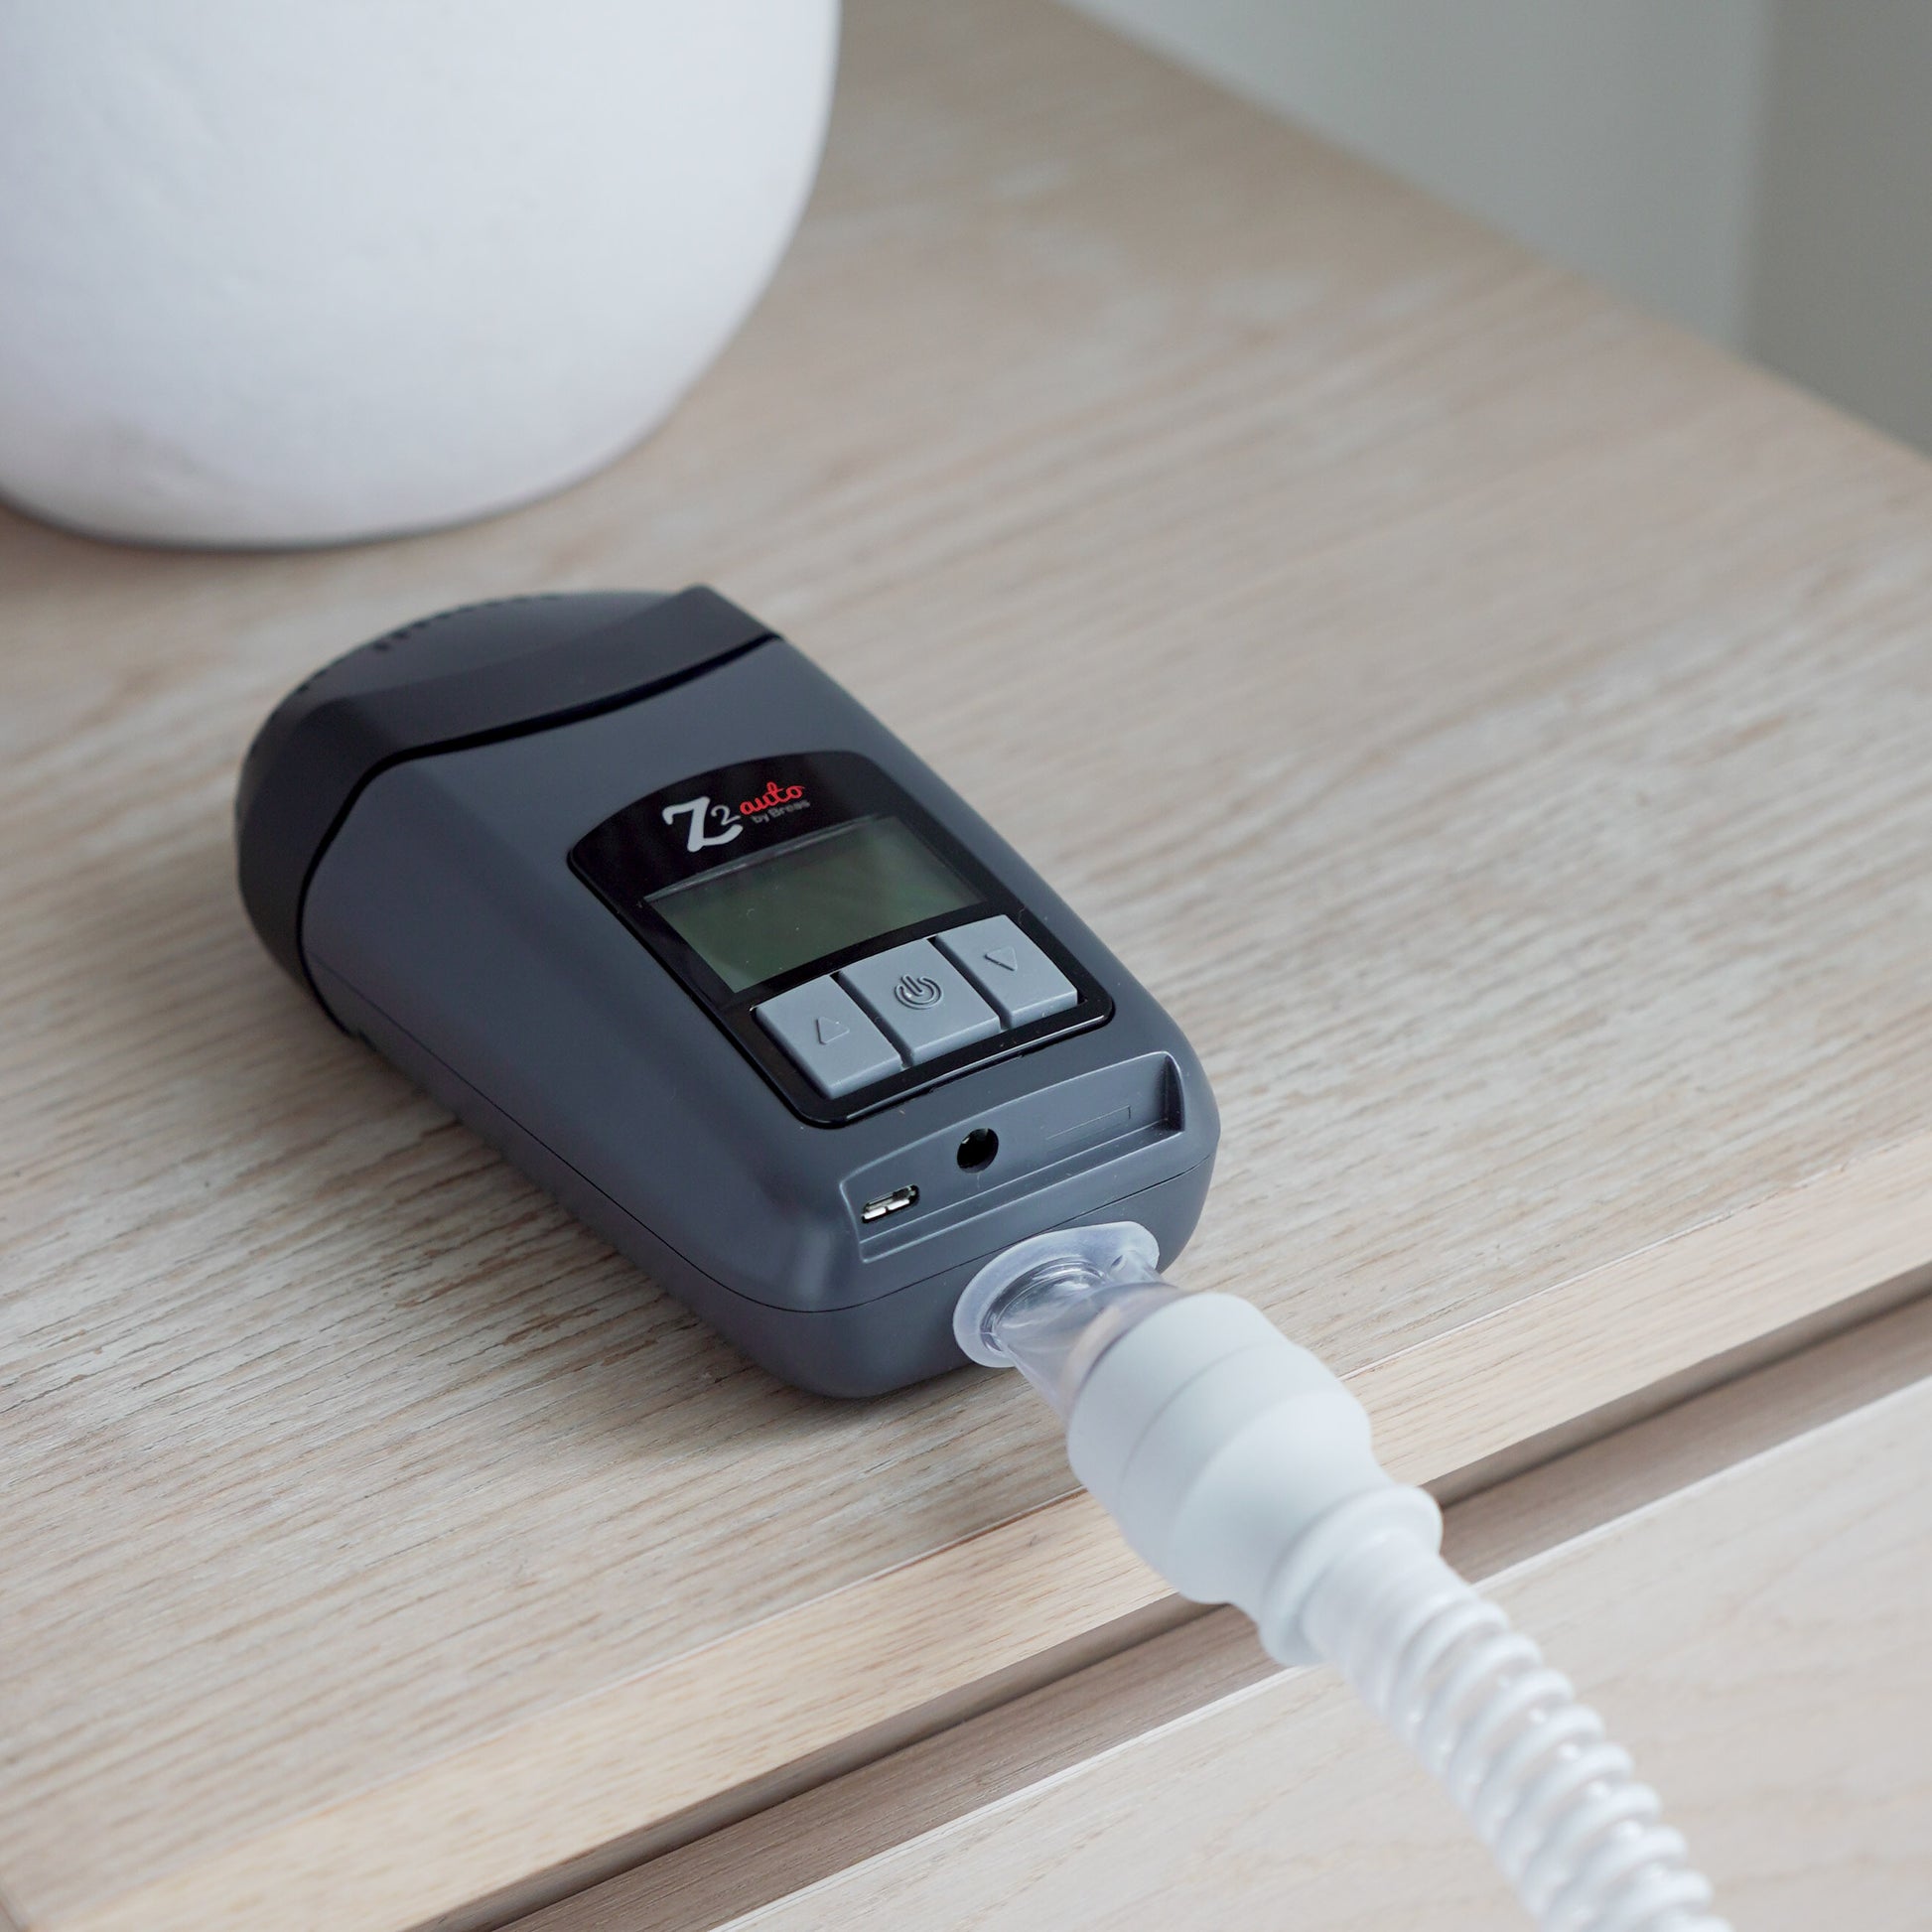 The Breas Z2 placed on a bedside table showing its small form factor